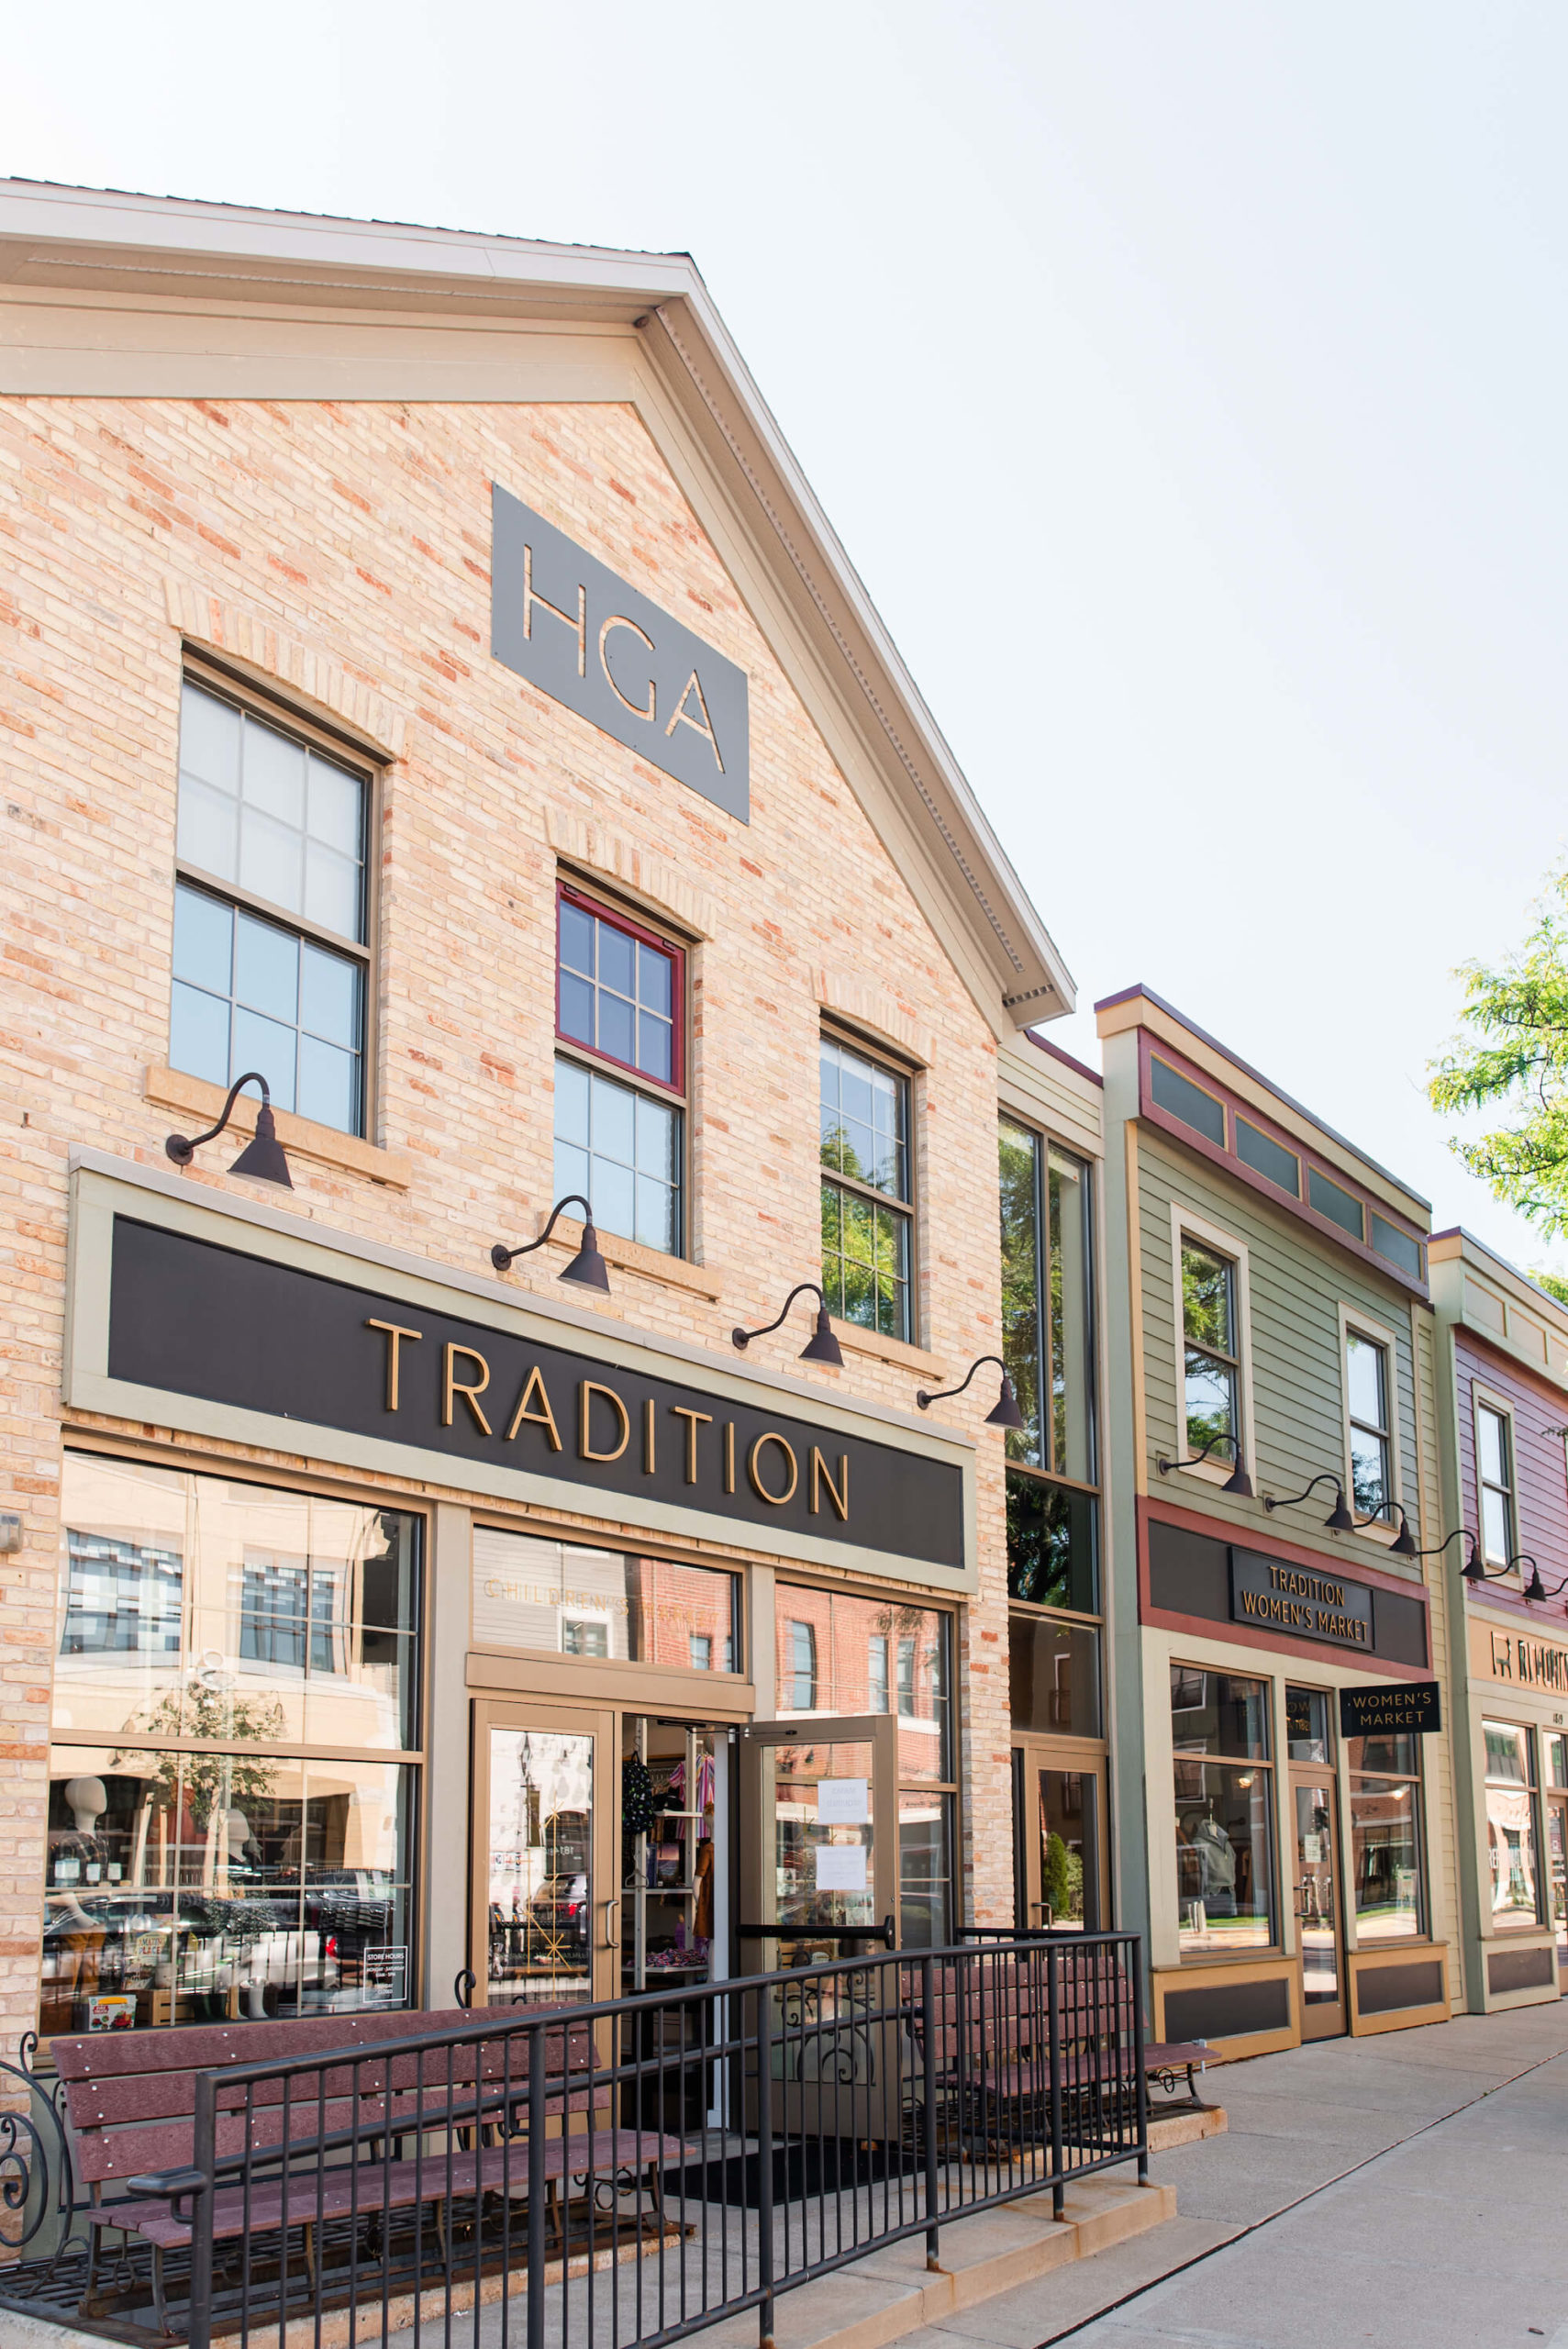 Shops in downtown Middleton, one of the best neighborhoods in Madison, WI